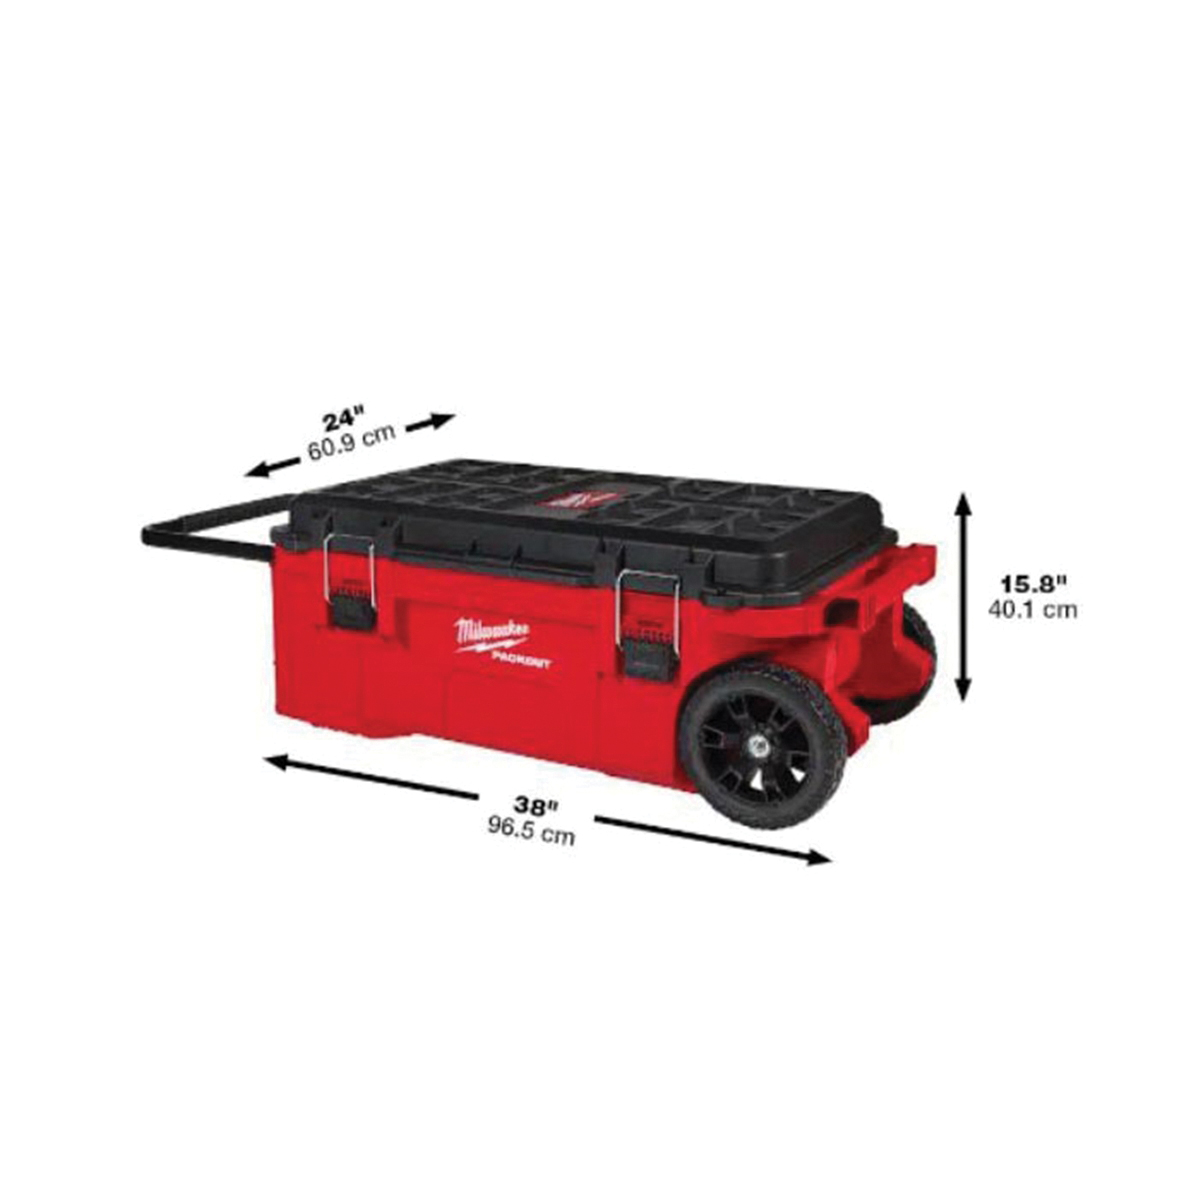 Milwaukee PACKOUT 48-22-8428 Rolling Tool Chest, 250 lb, 38 in OAW, 15.8 in OAH, 24 in OAD, Plastic, 3-Drawer - 5